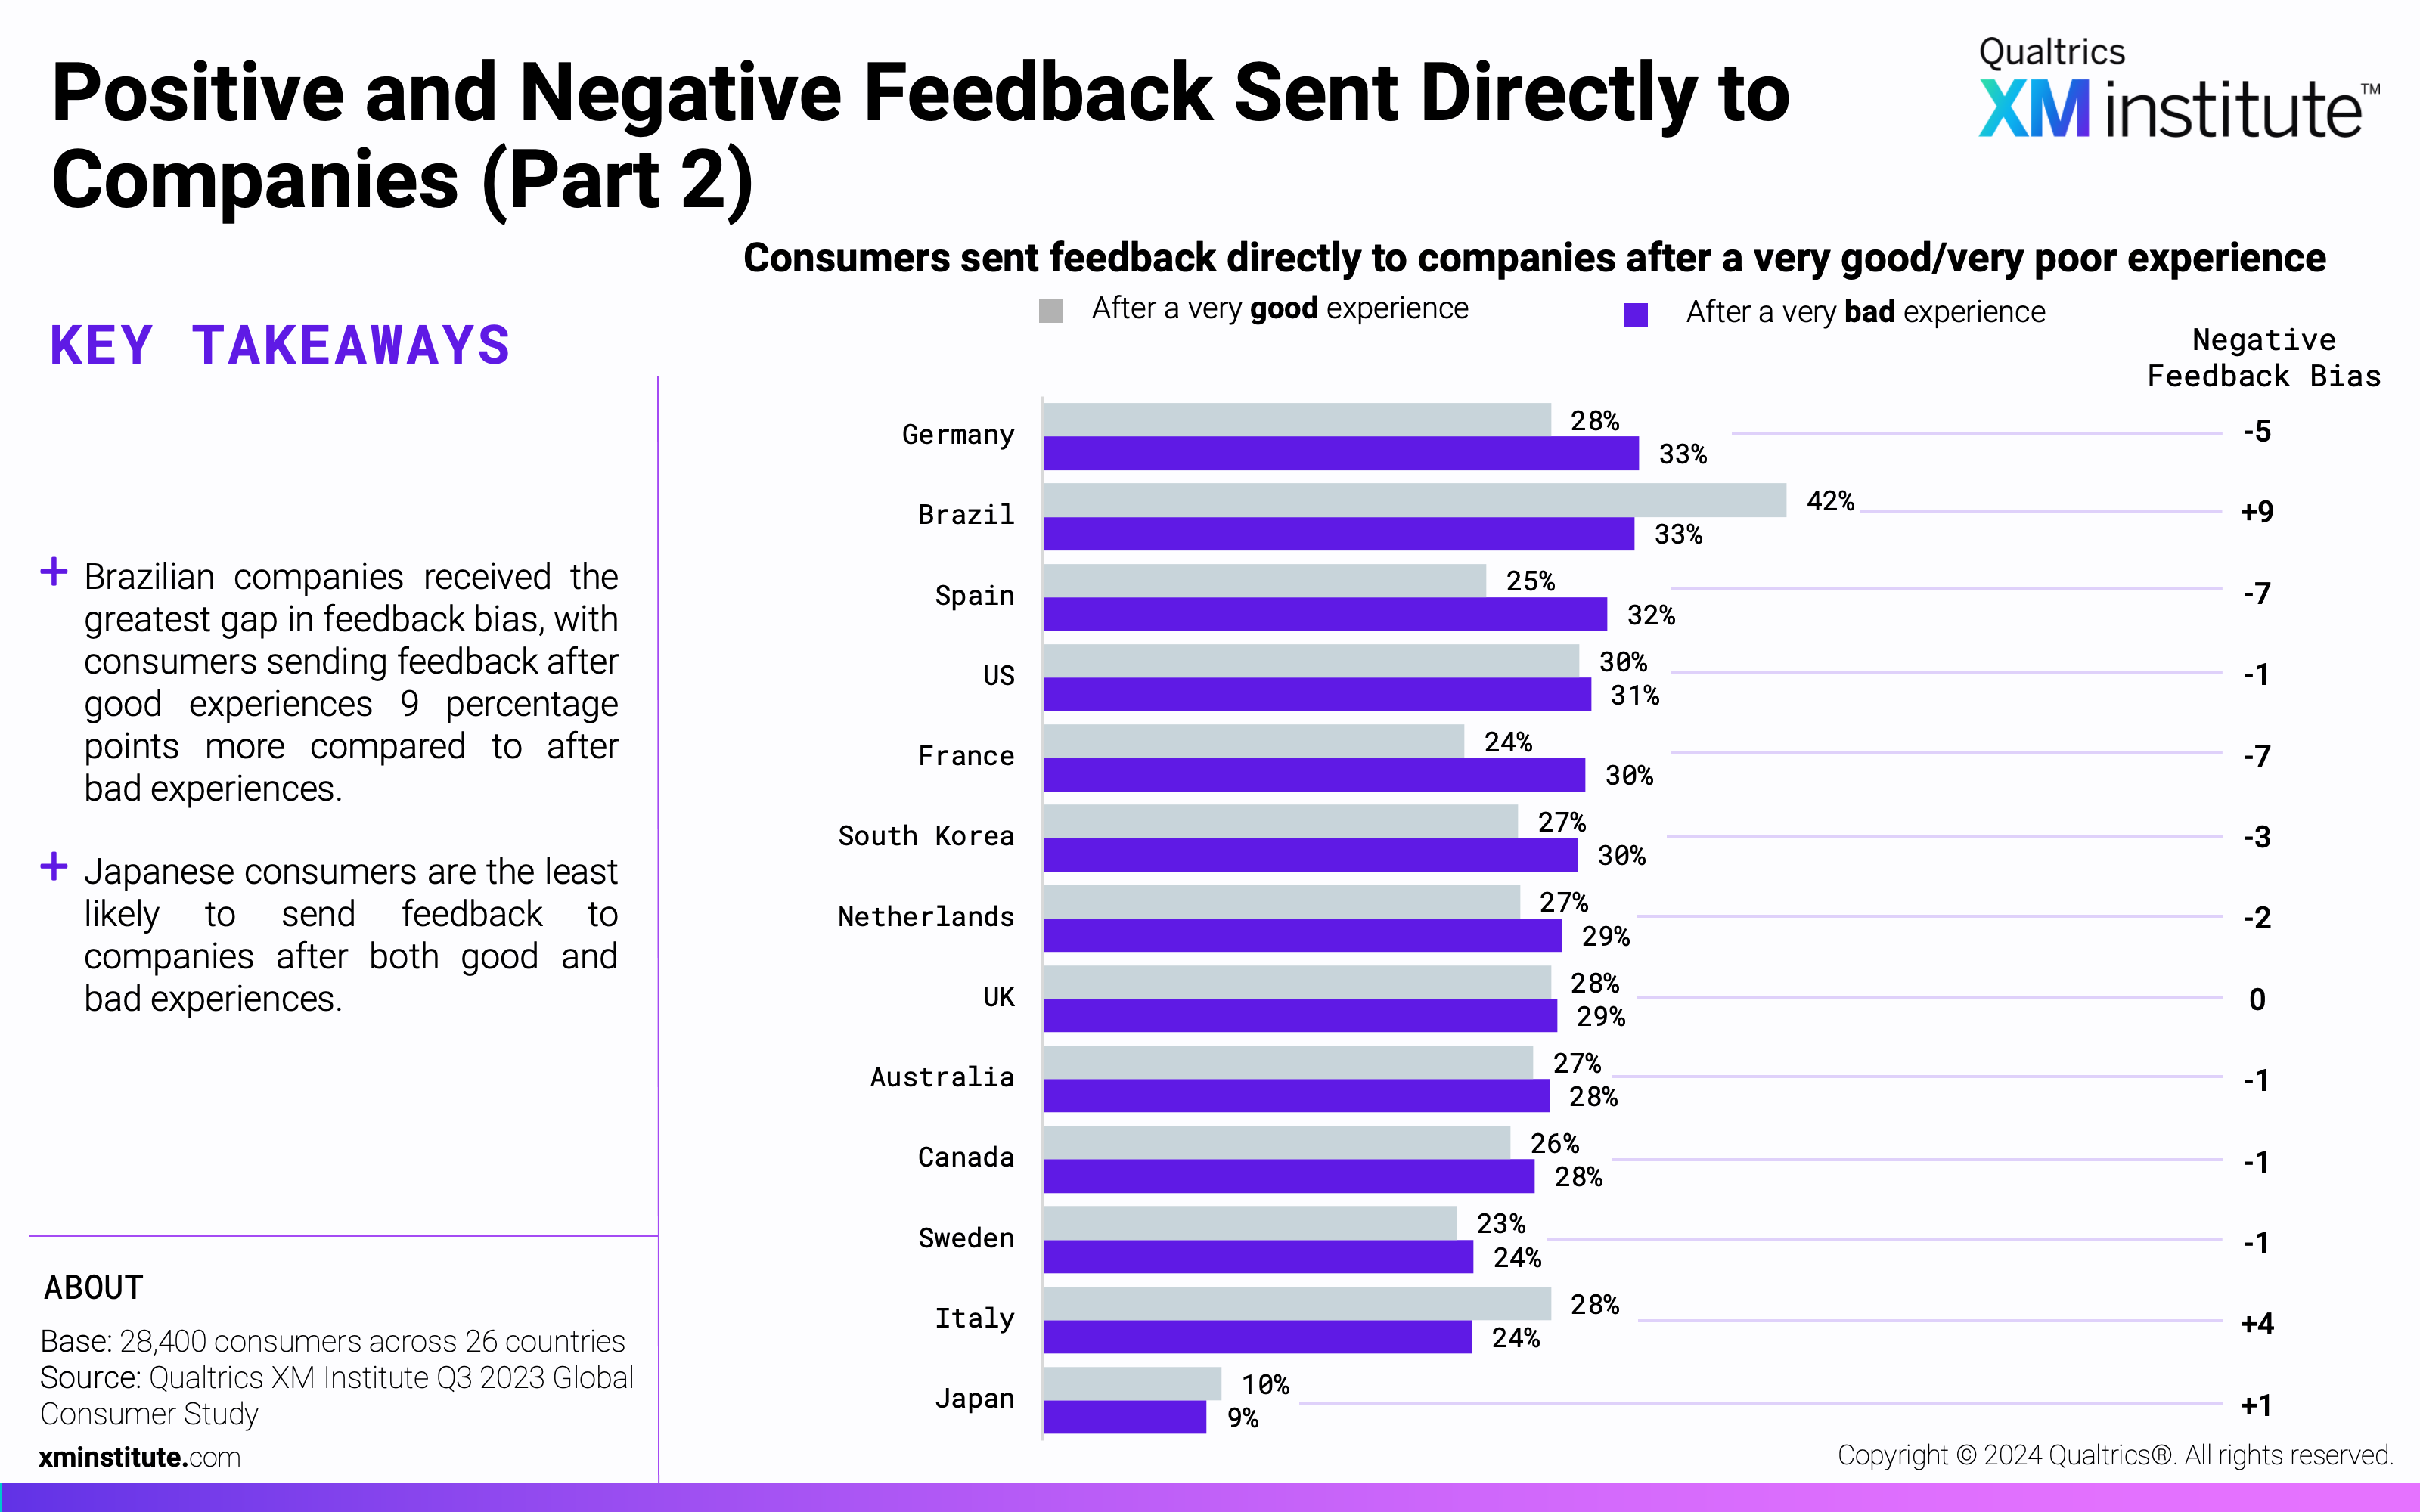 This chart shows the percentage of consumers from each country that sent direct feedback to a company after a very good versus after a very bad experience. 